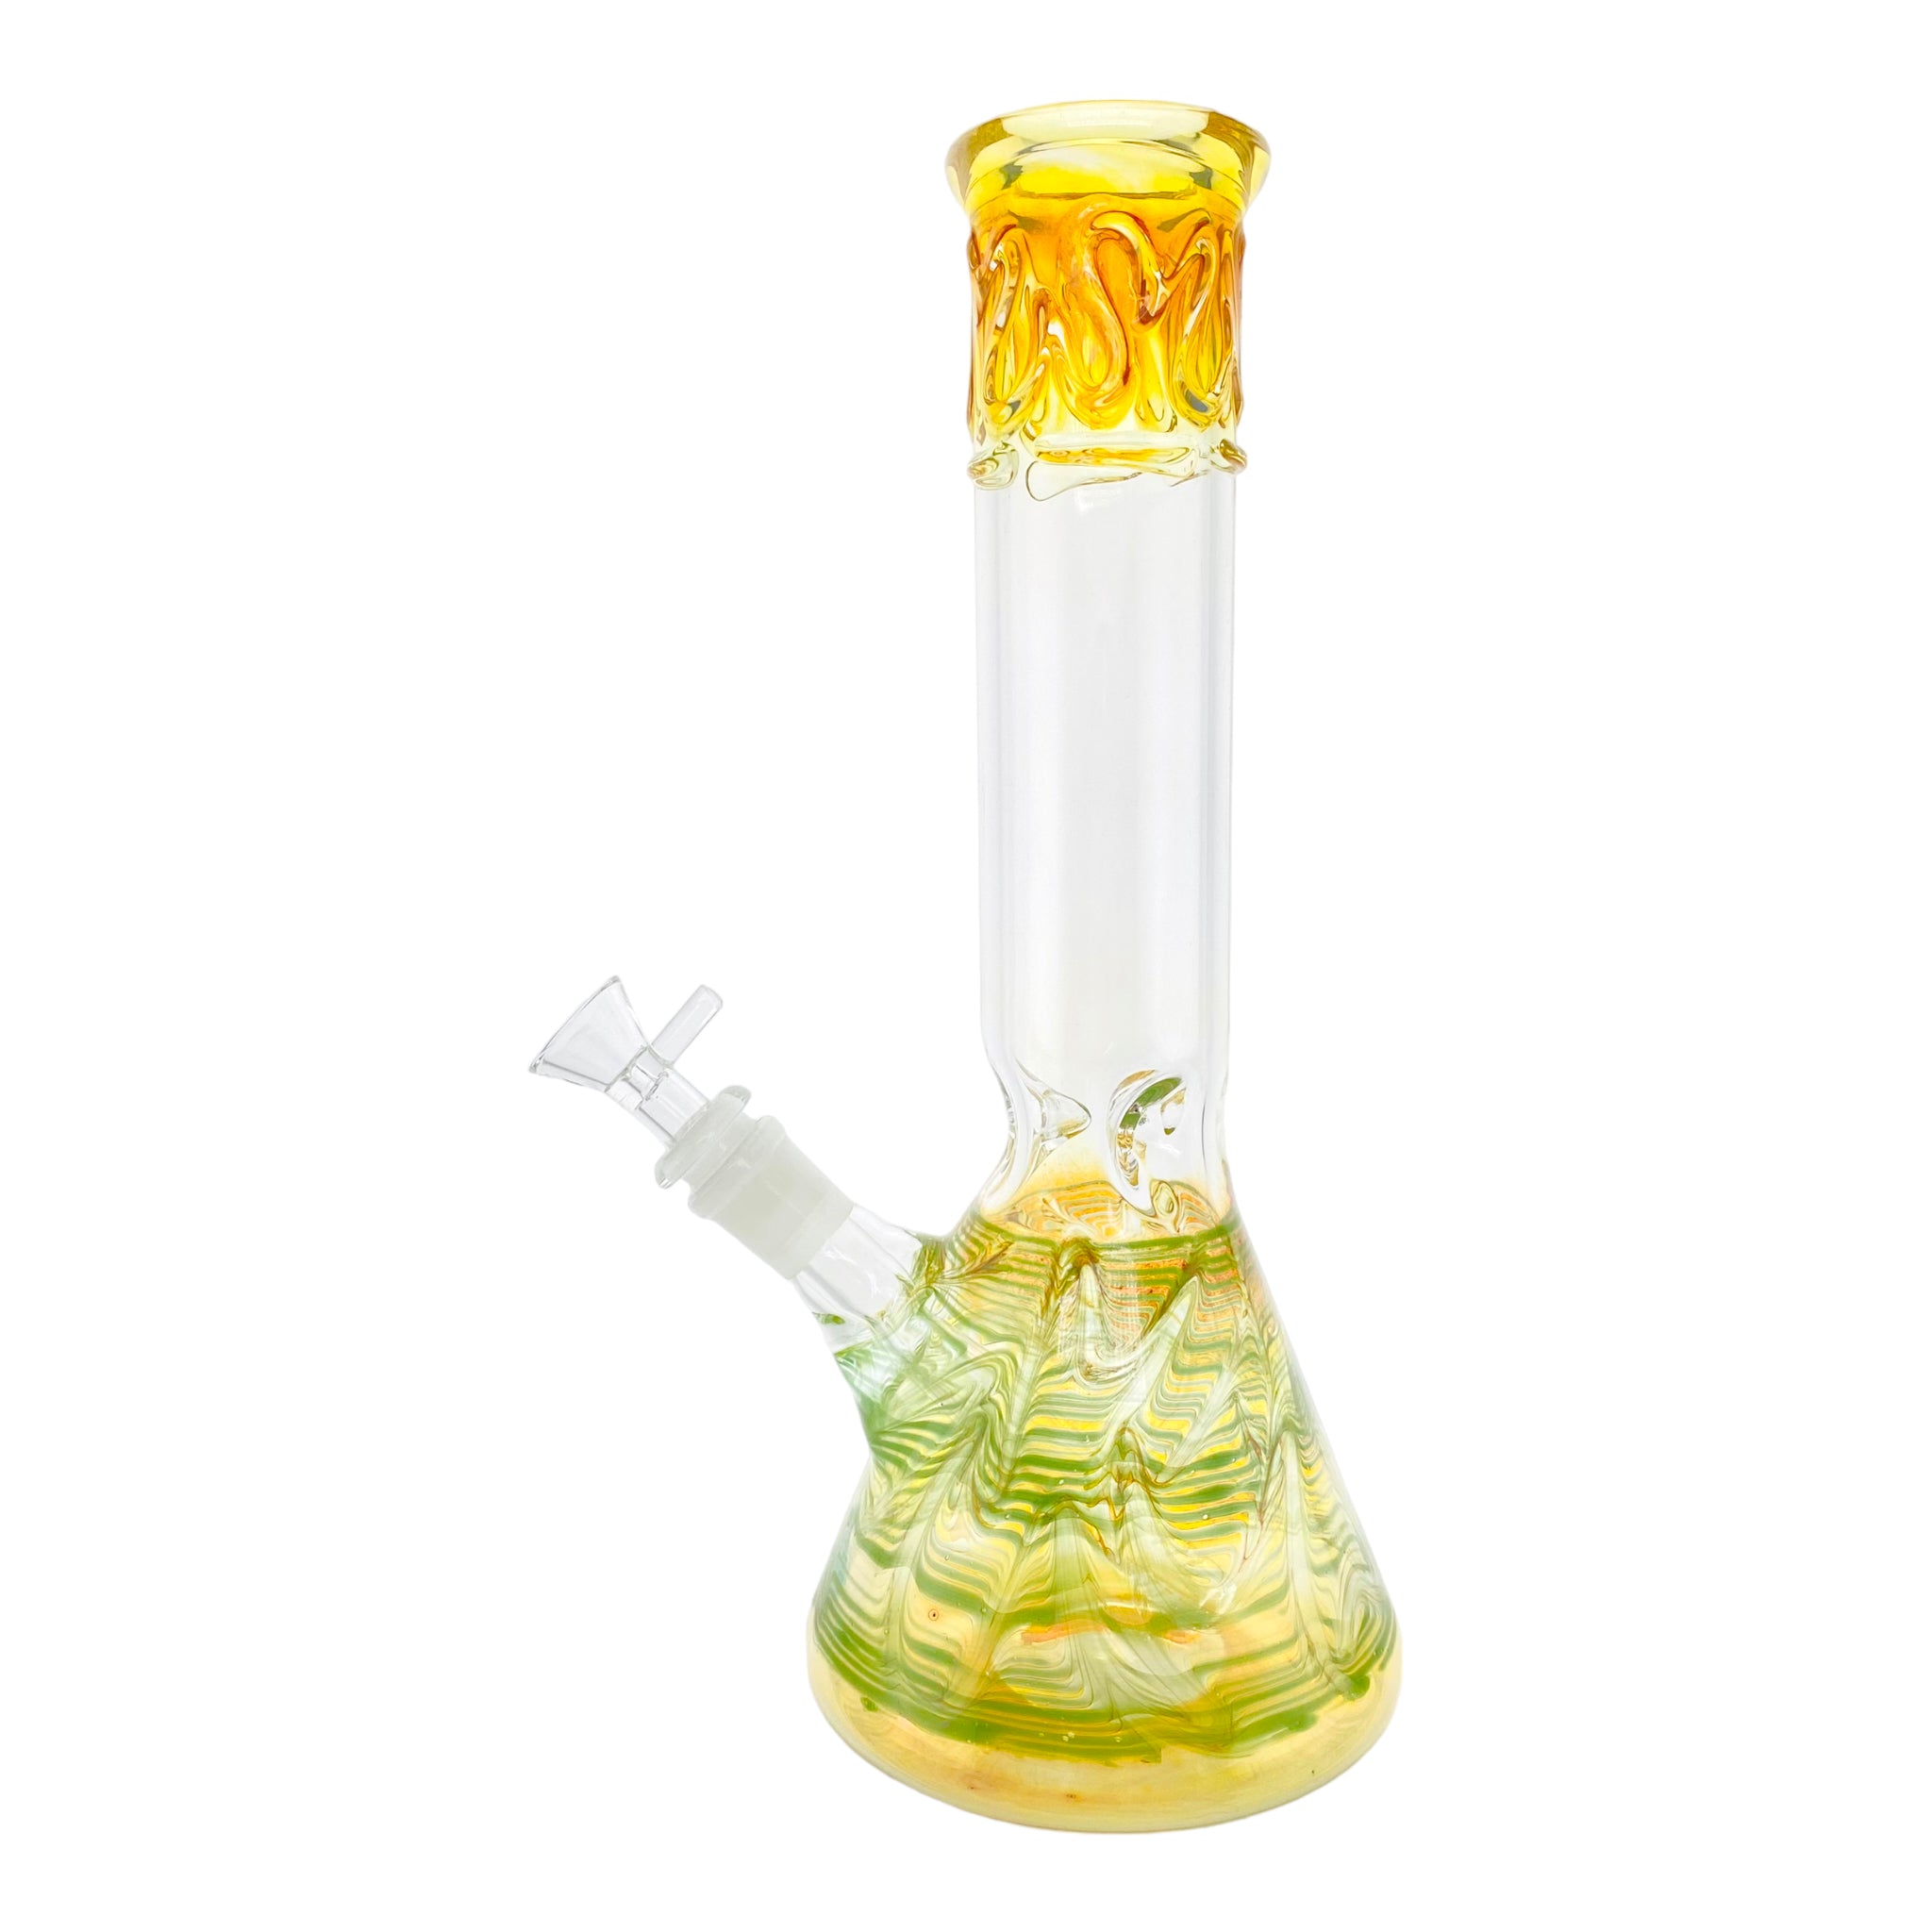 12 Inch Beaker Bong With Color Changing Fuming And Green Wrap And Rake